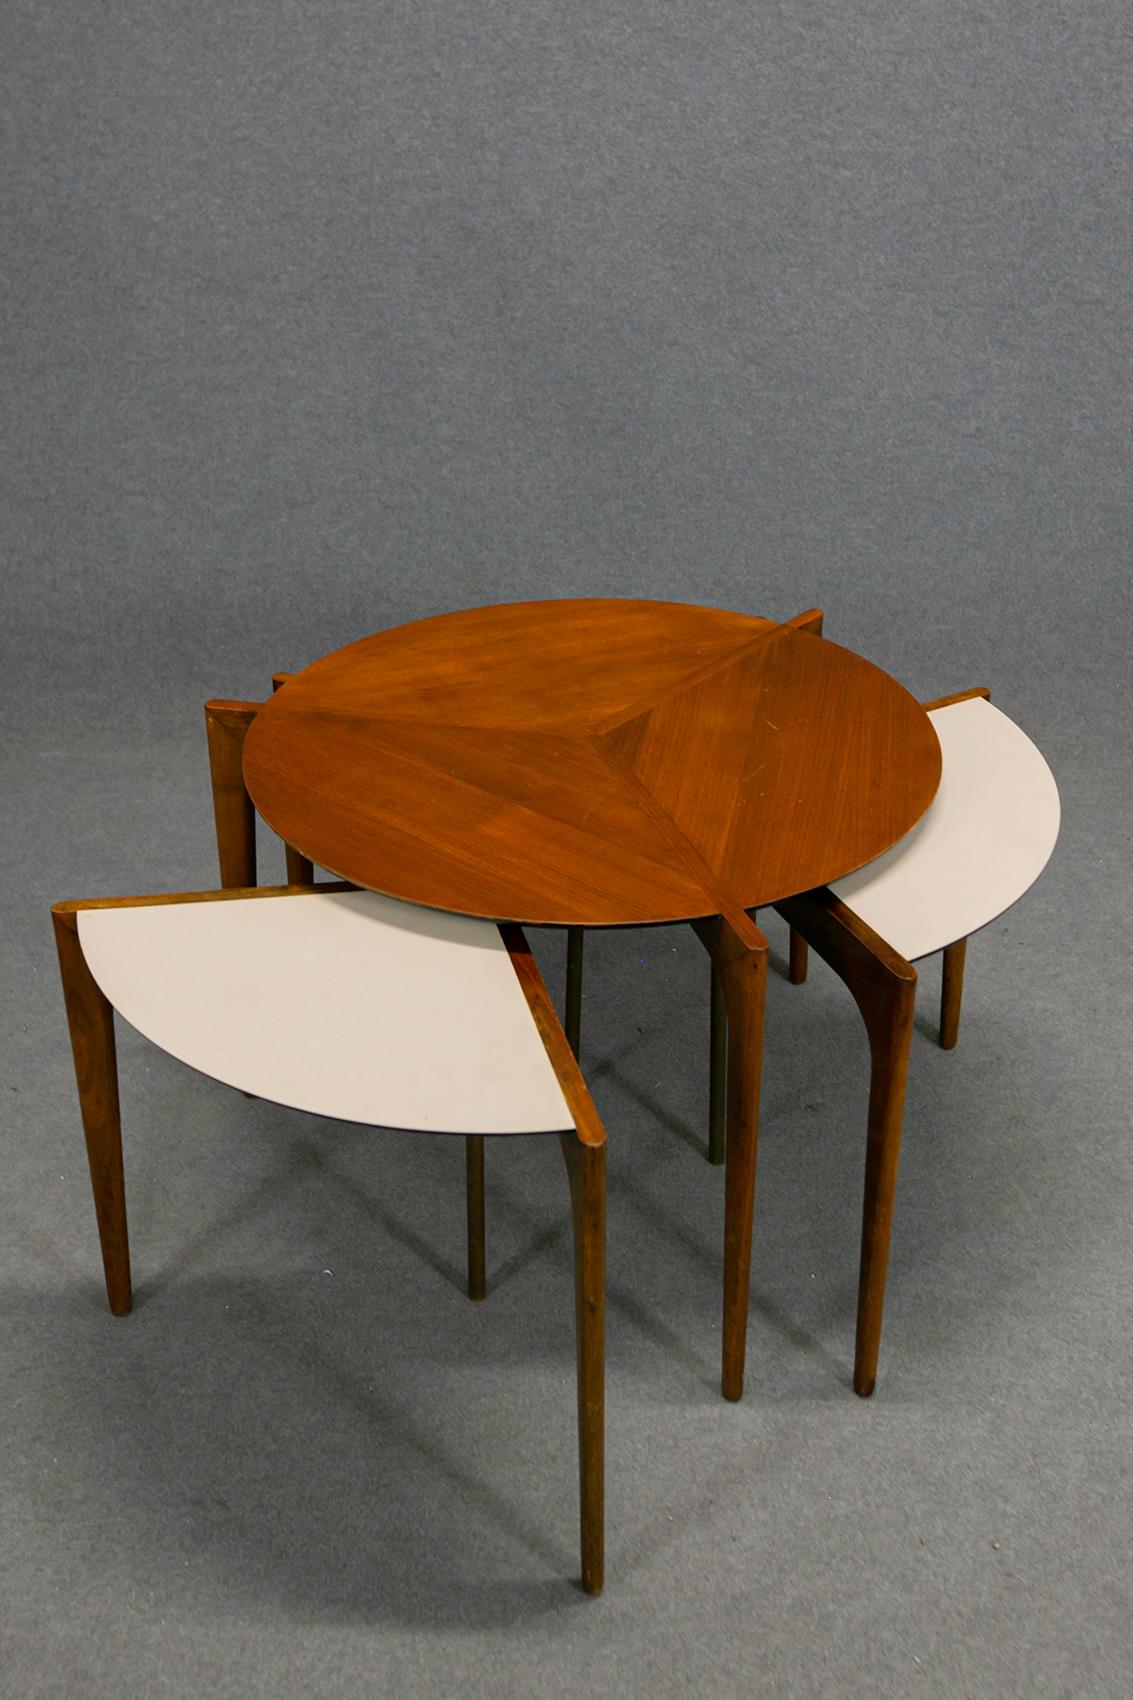 Rare wooden table by Vladimir Kagan with removable modular elements. The central table has three other small tables in the shape of segments underneath its supporting table. The table then opens to give space to three other elements. Their shelves